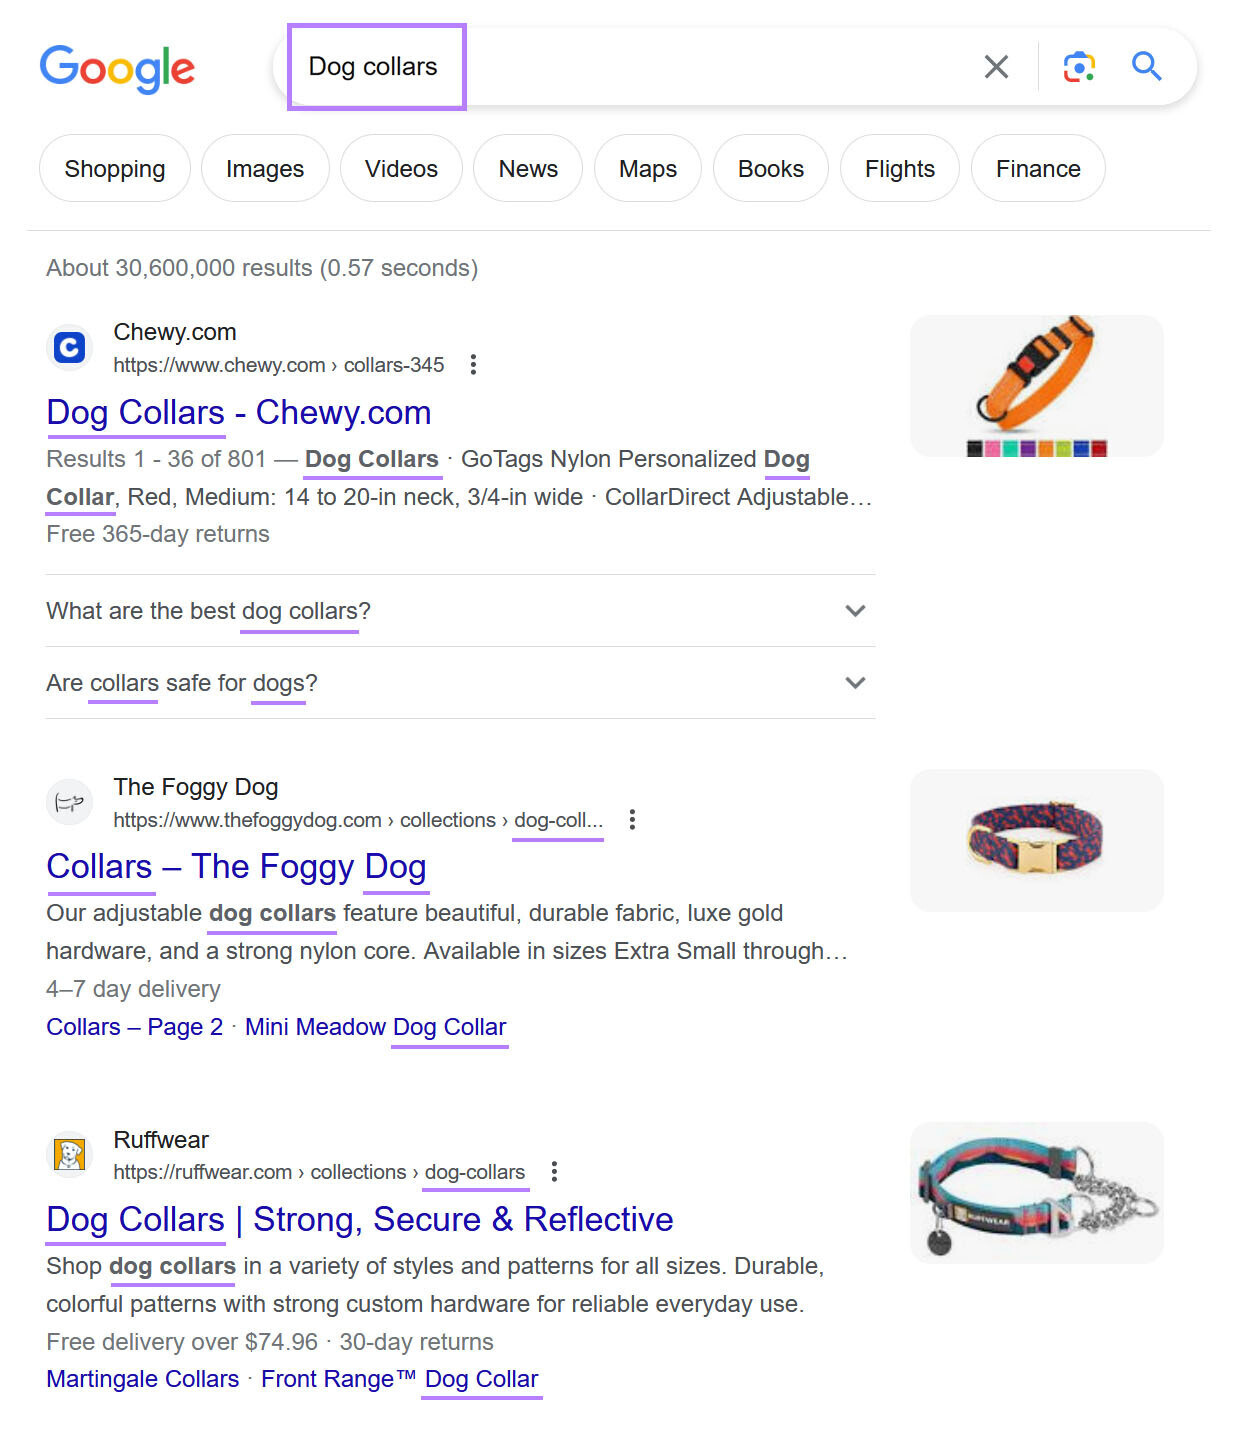 search engine results page (SERP) for "dog collars"